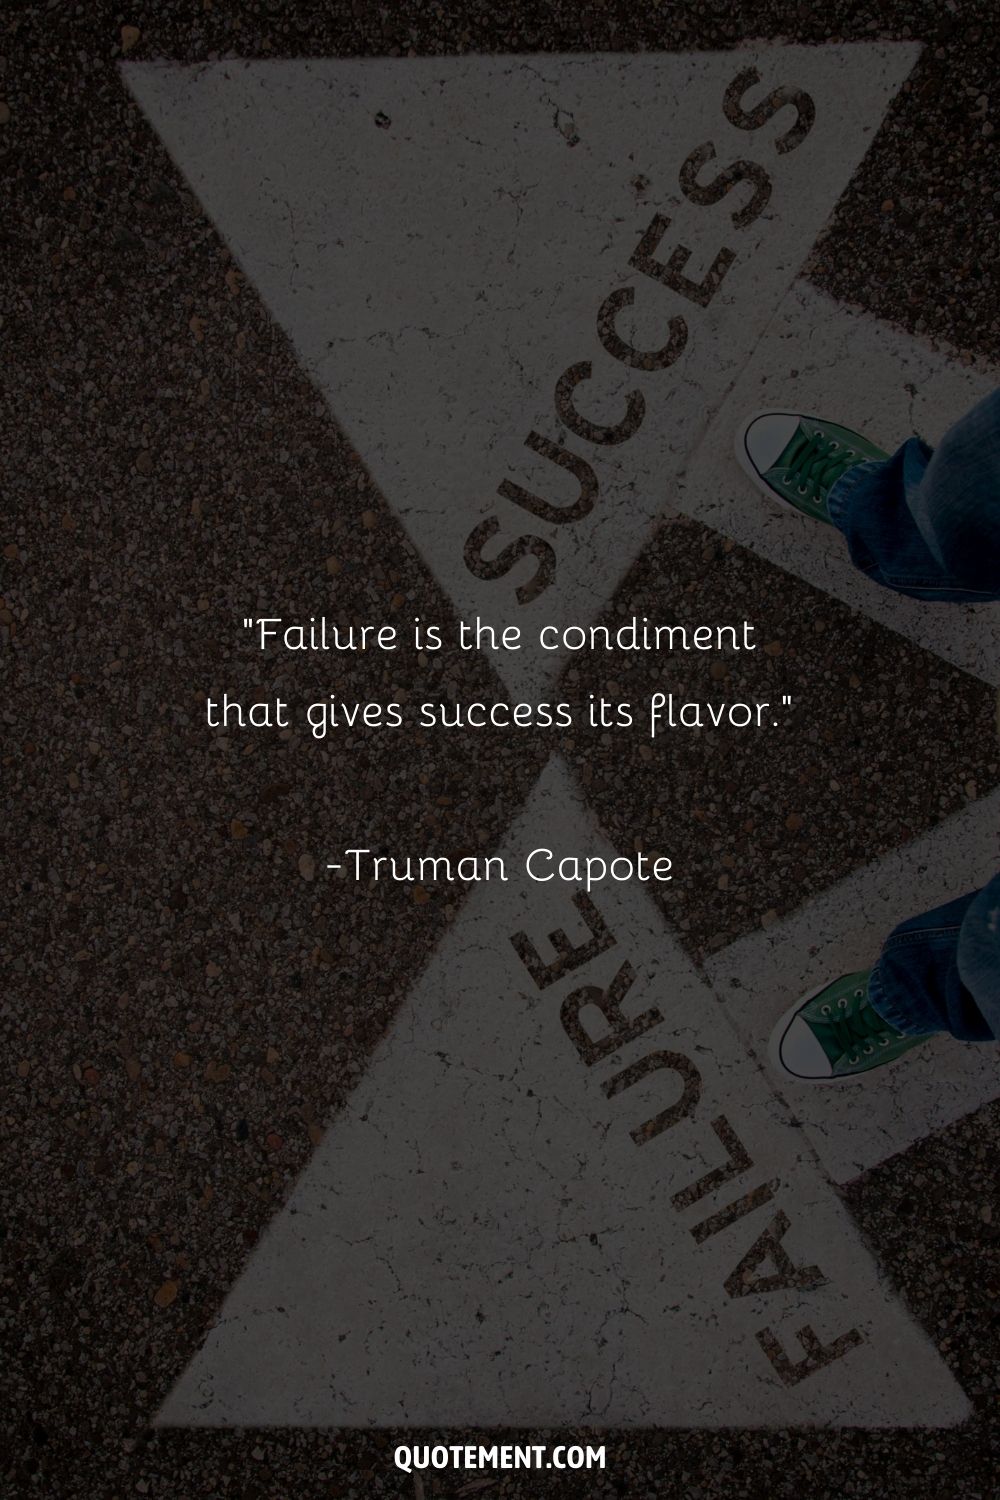 “Failure is the condiment that gives success its flavor.” ― Truman Capote